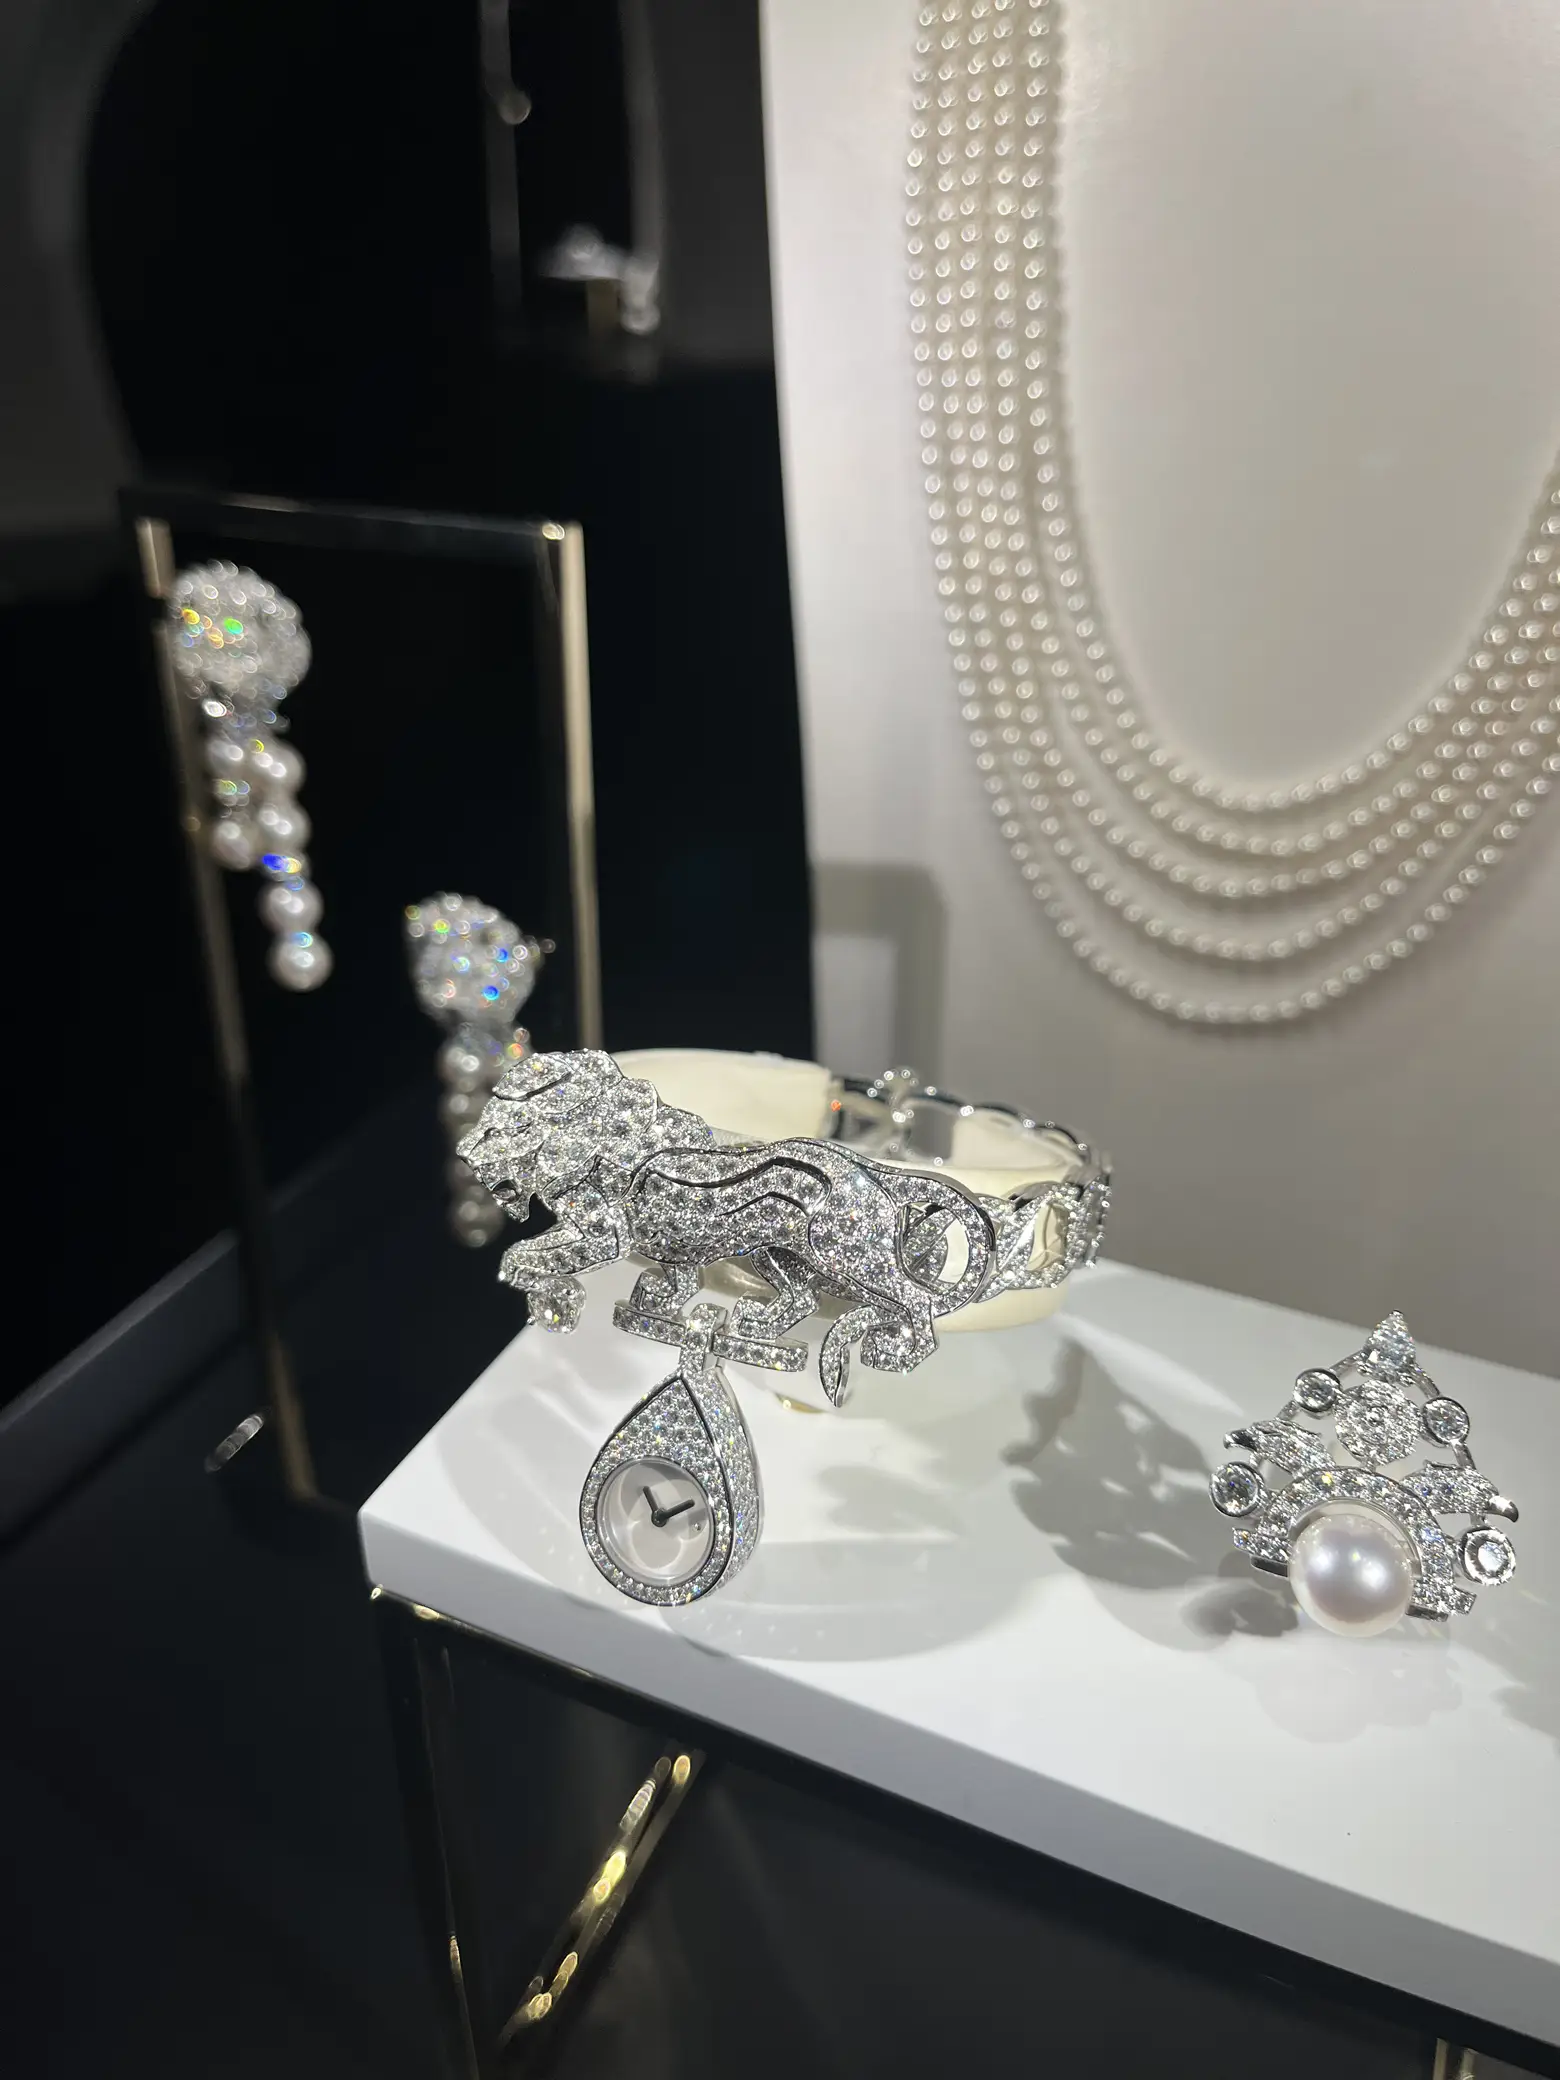 Chanel Returns To Its Roots With Its New High Jewellery Collection